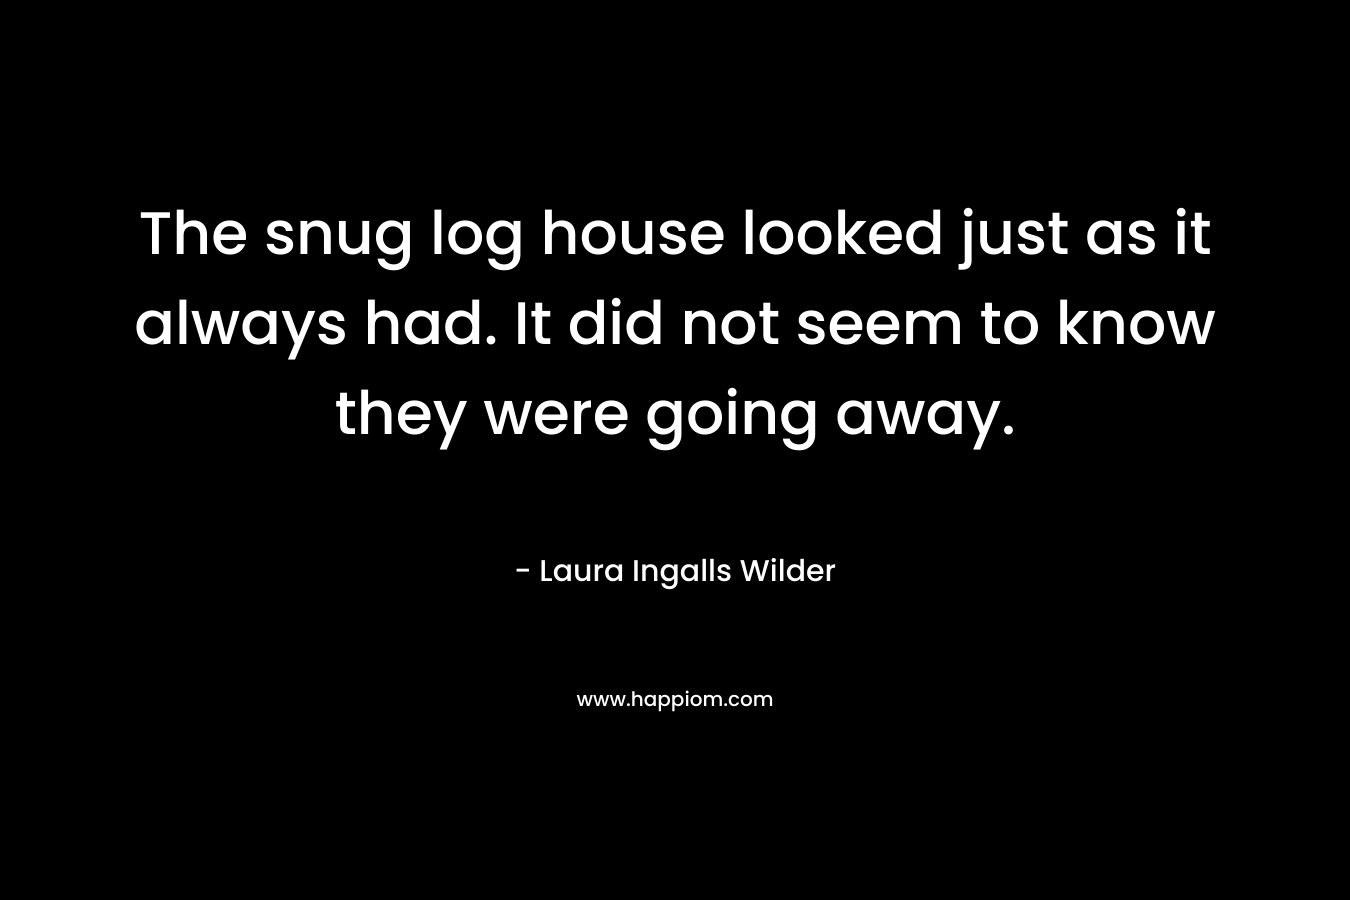 The snug log house looked just as it always had. It did not seem to know they were going away.